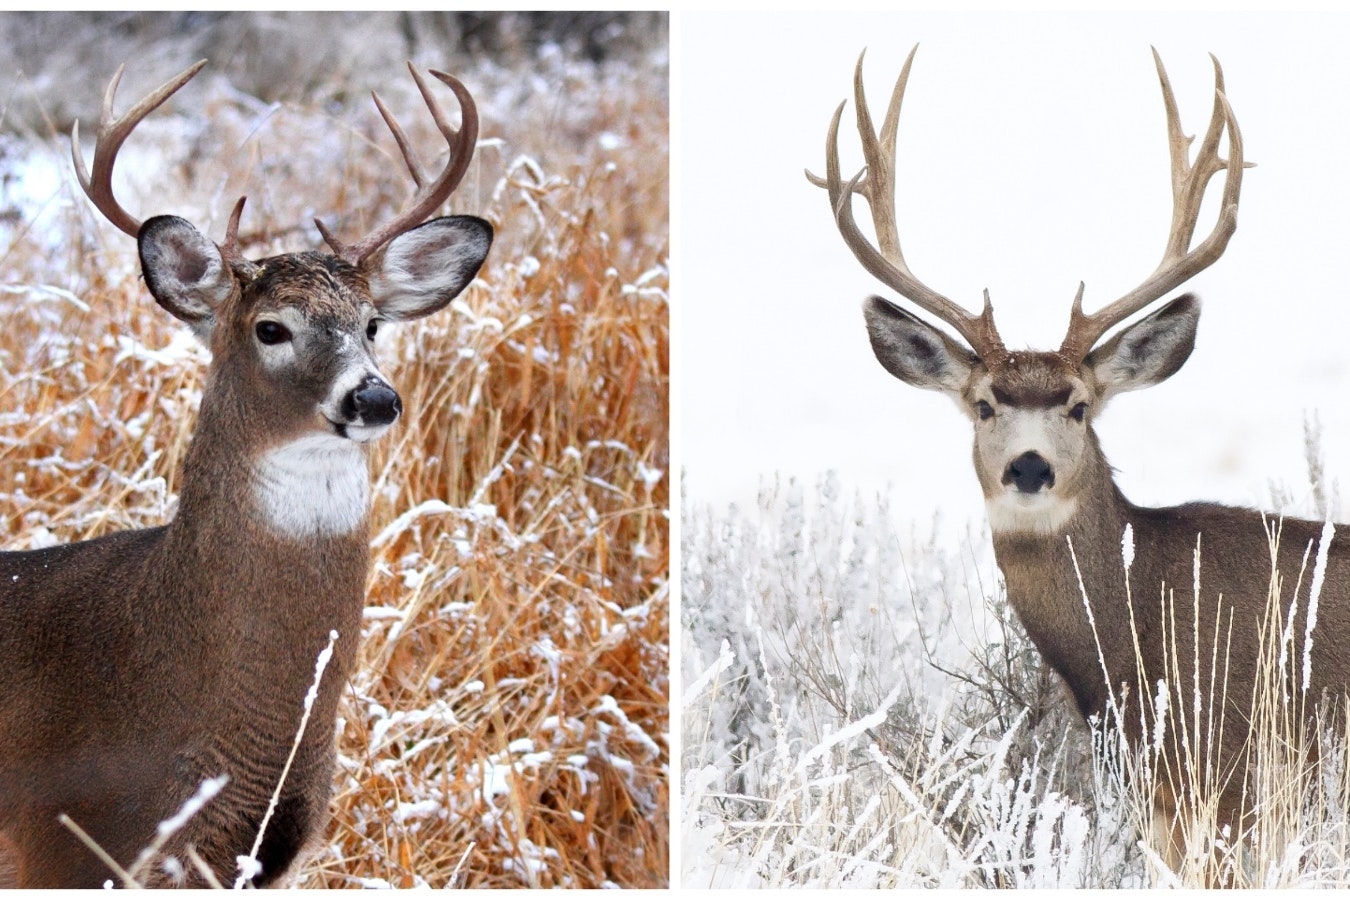 A whitetail deer, left, and mule deer, right.